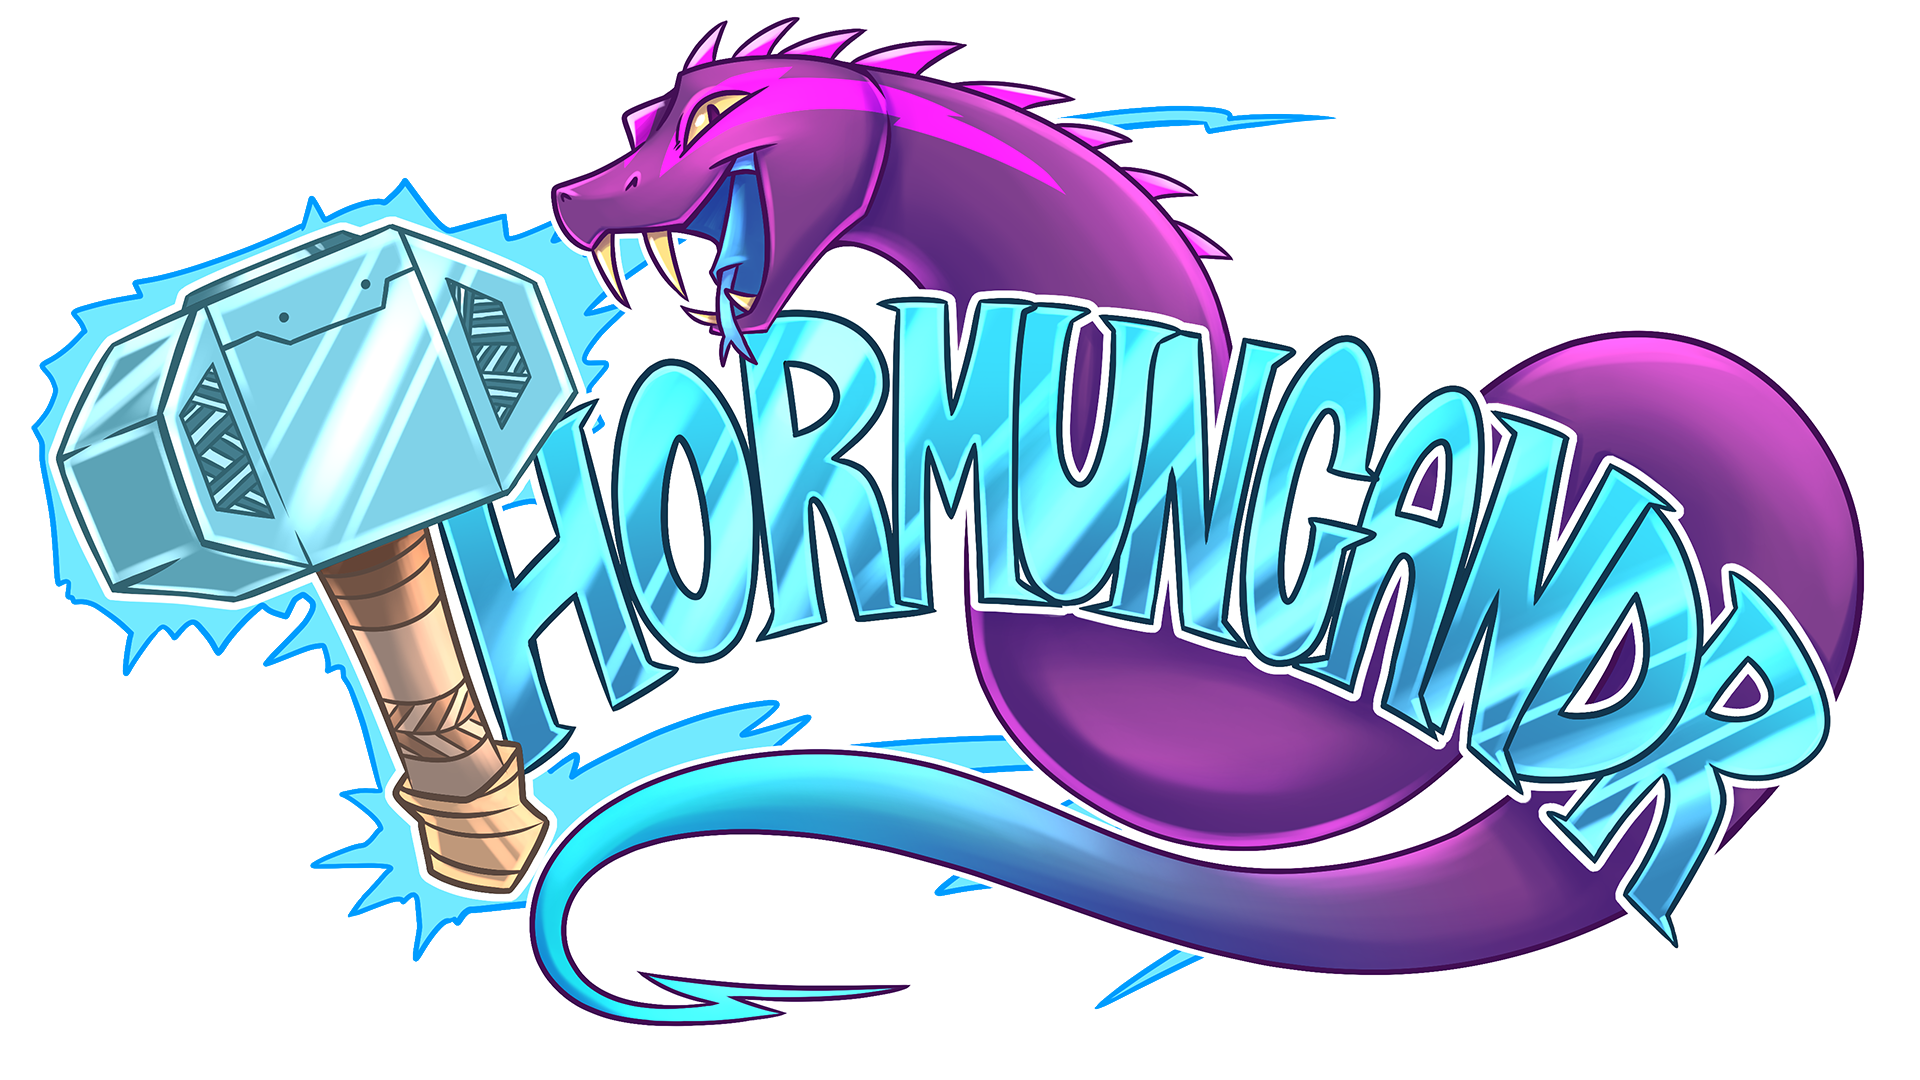 Thormungandr official logo graphic made by AttacRacc